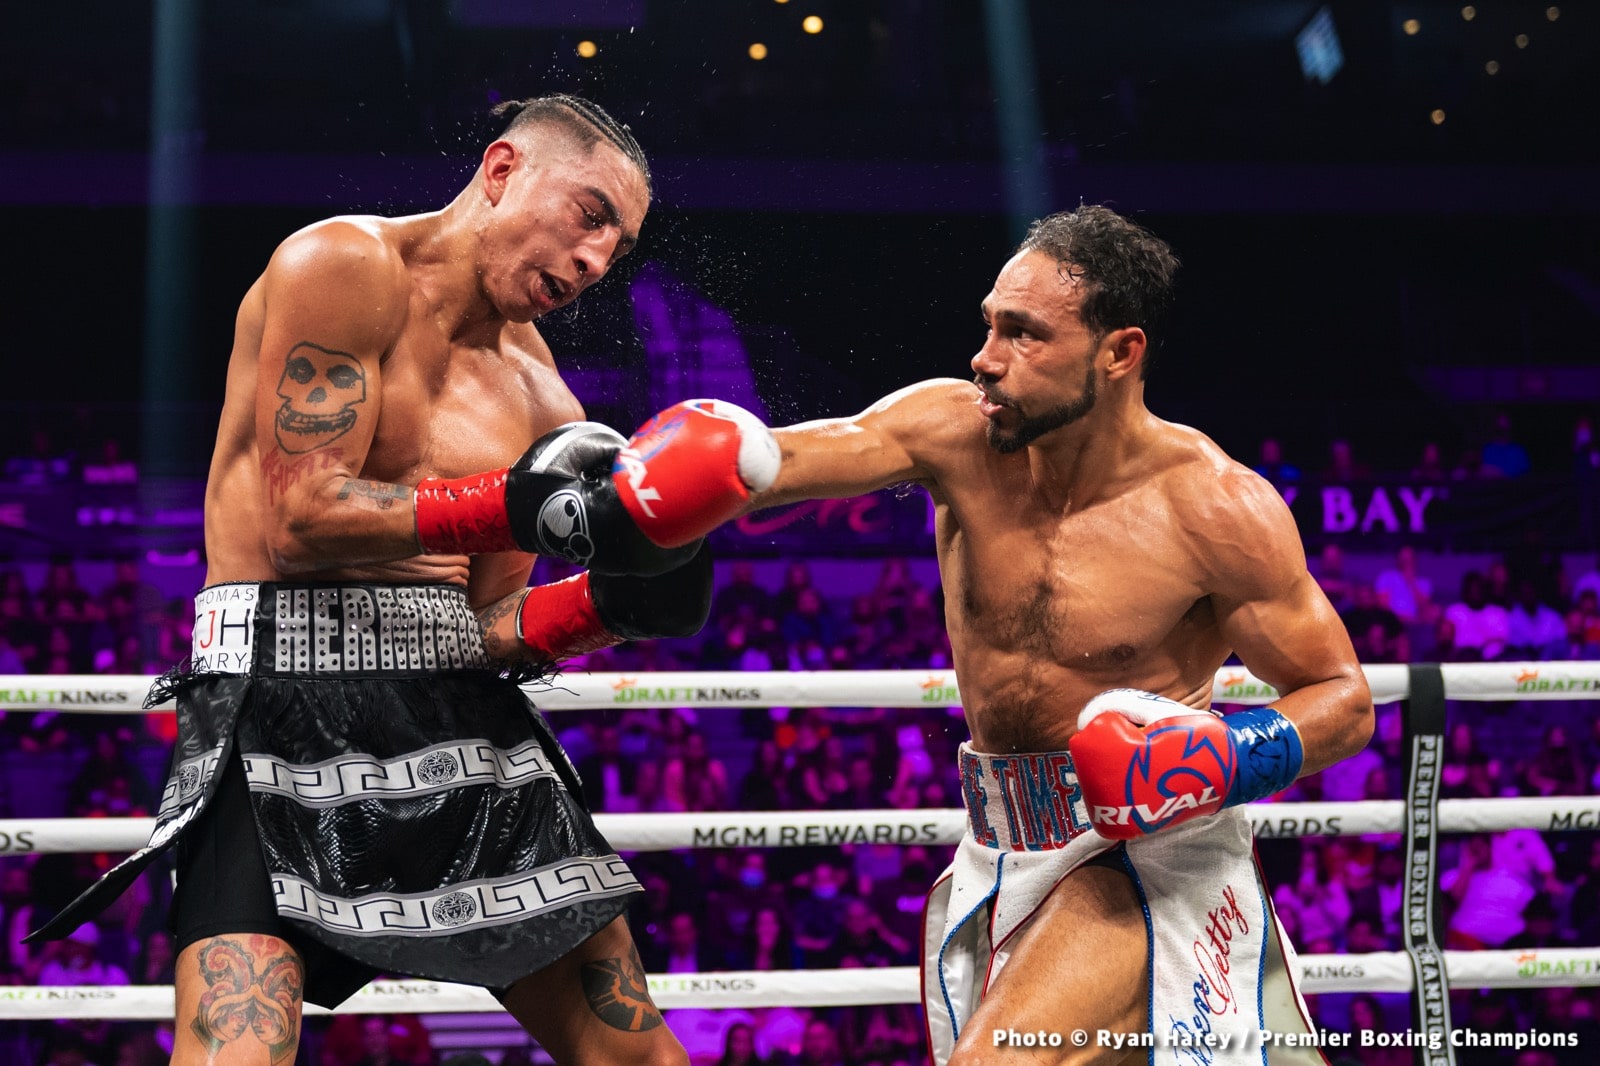 Image: Thurman will be in TROUBLE against Vergil Ortiz Jr says Abner Mares